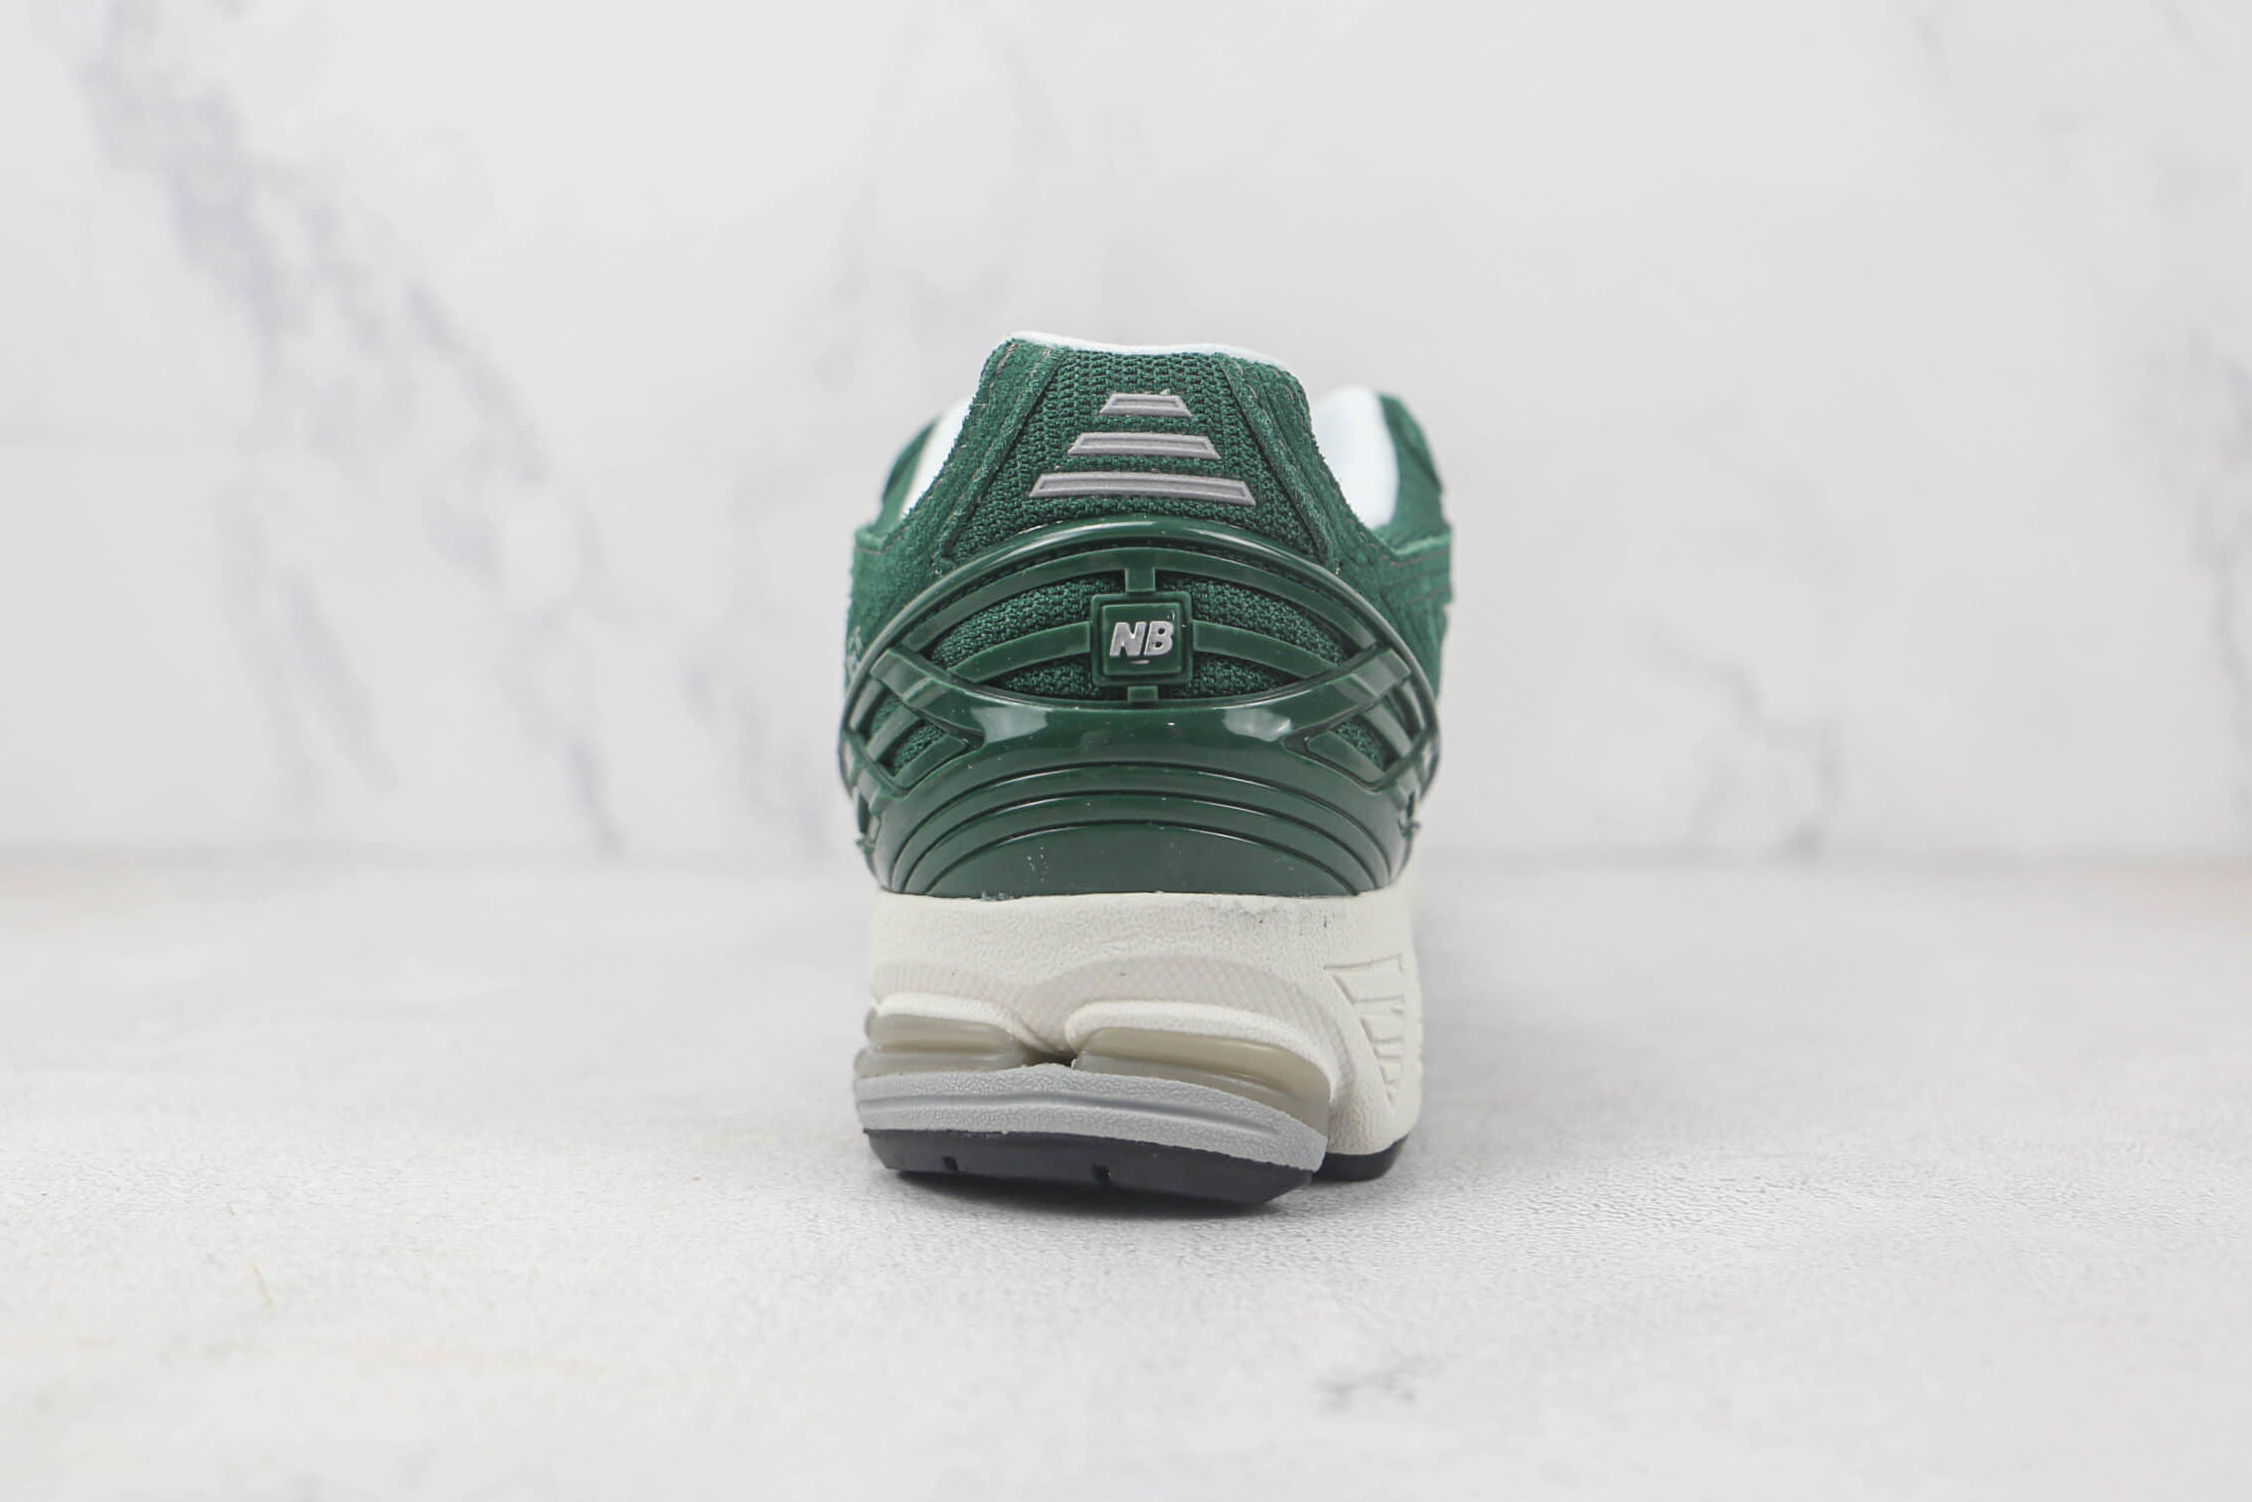 New Balance 1906R 'Nightwatch Green' M1906RX - Sneakers for Nighttime Style